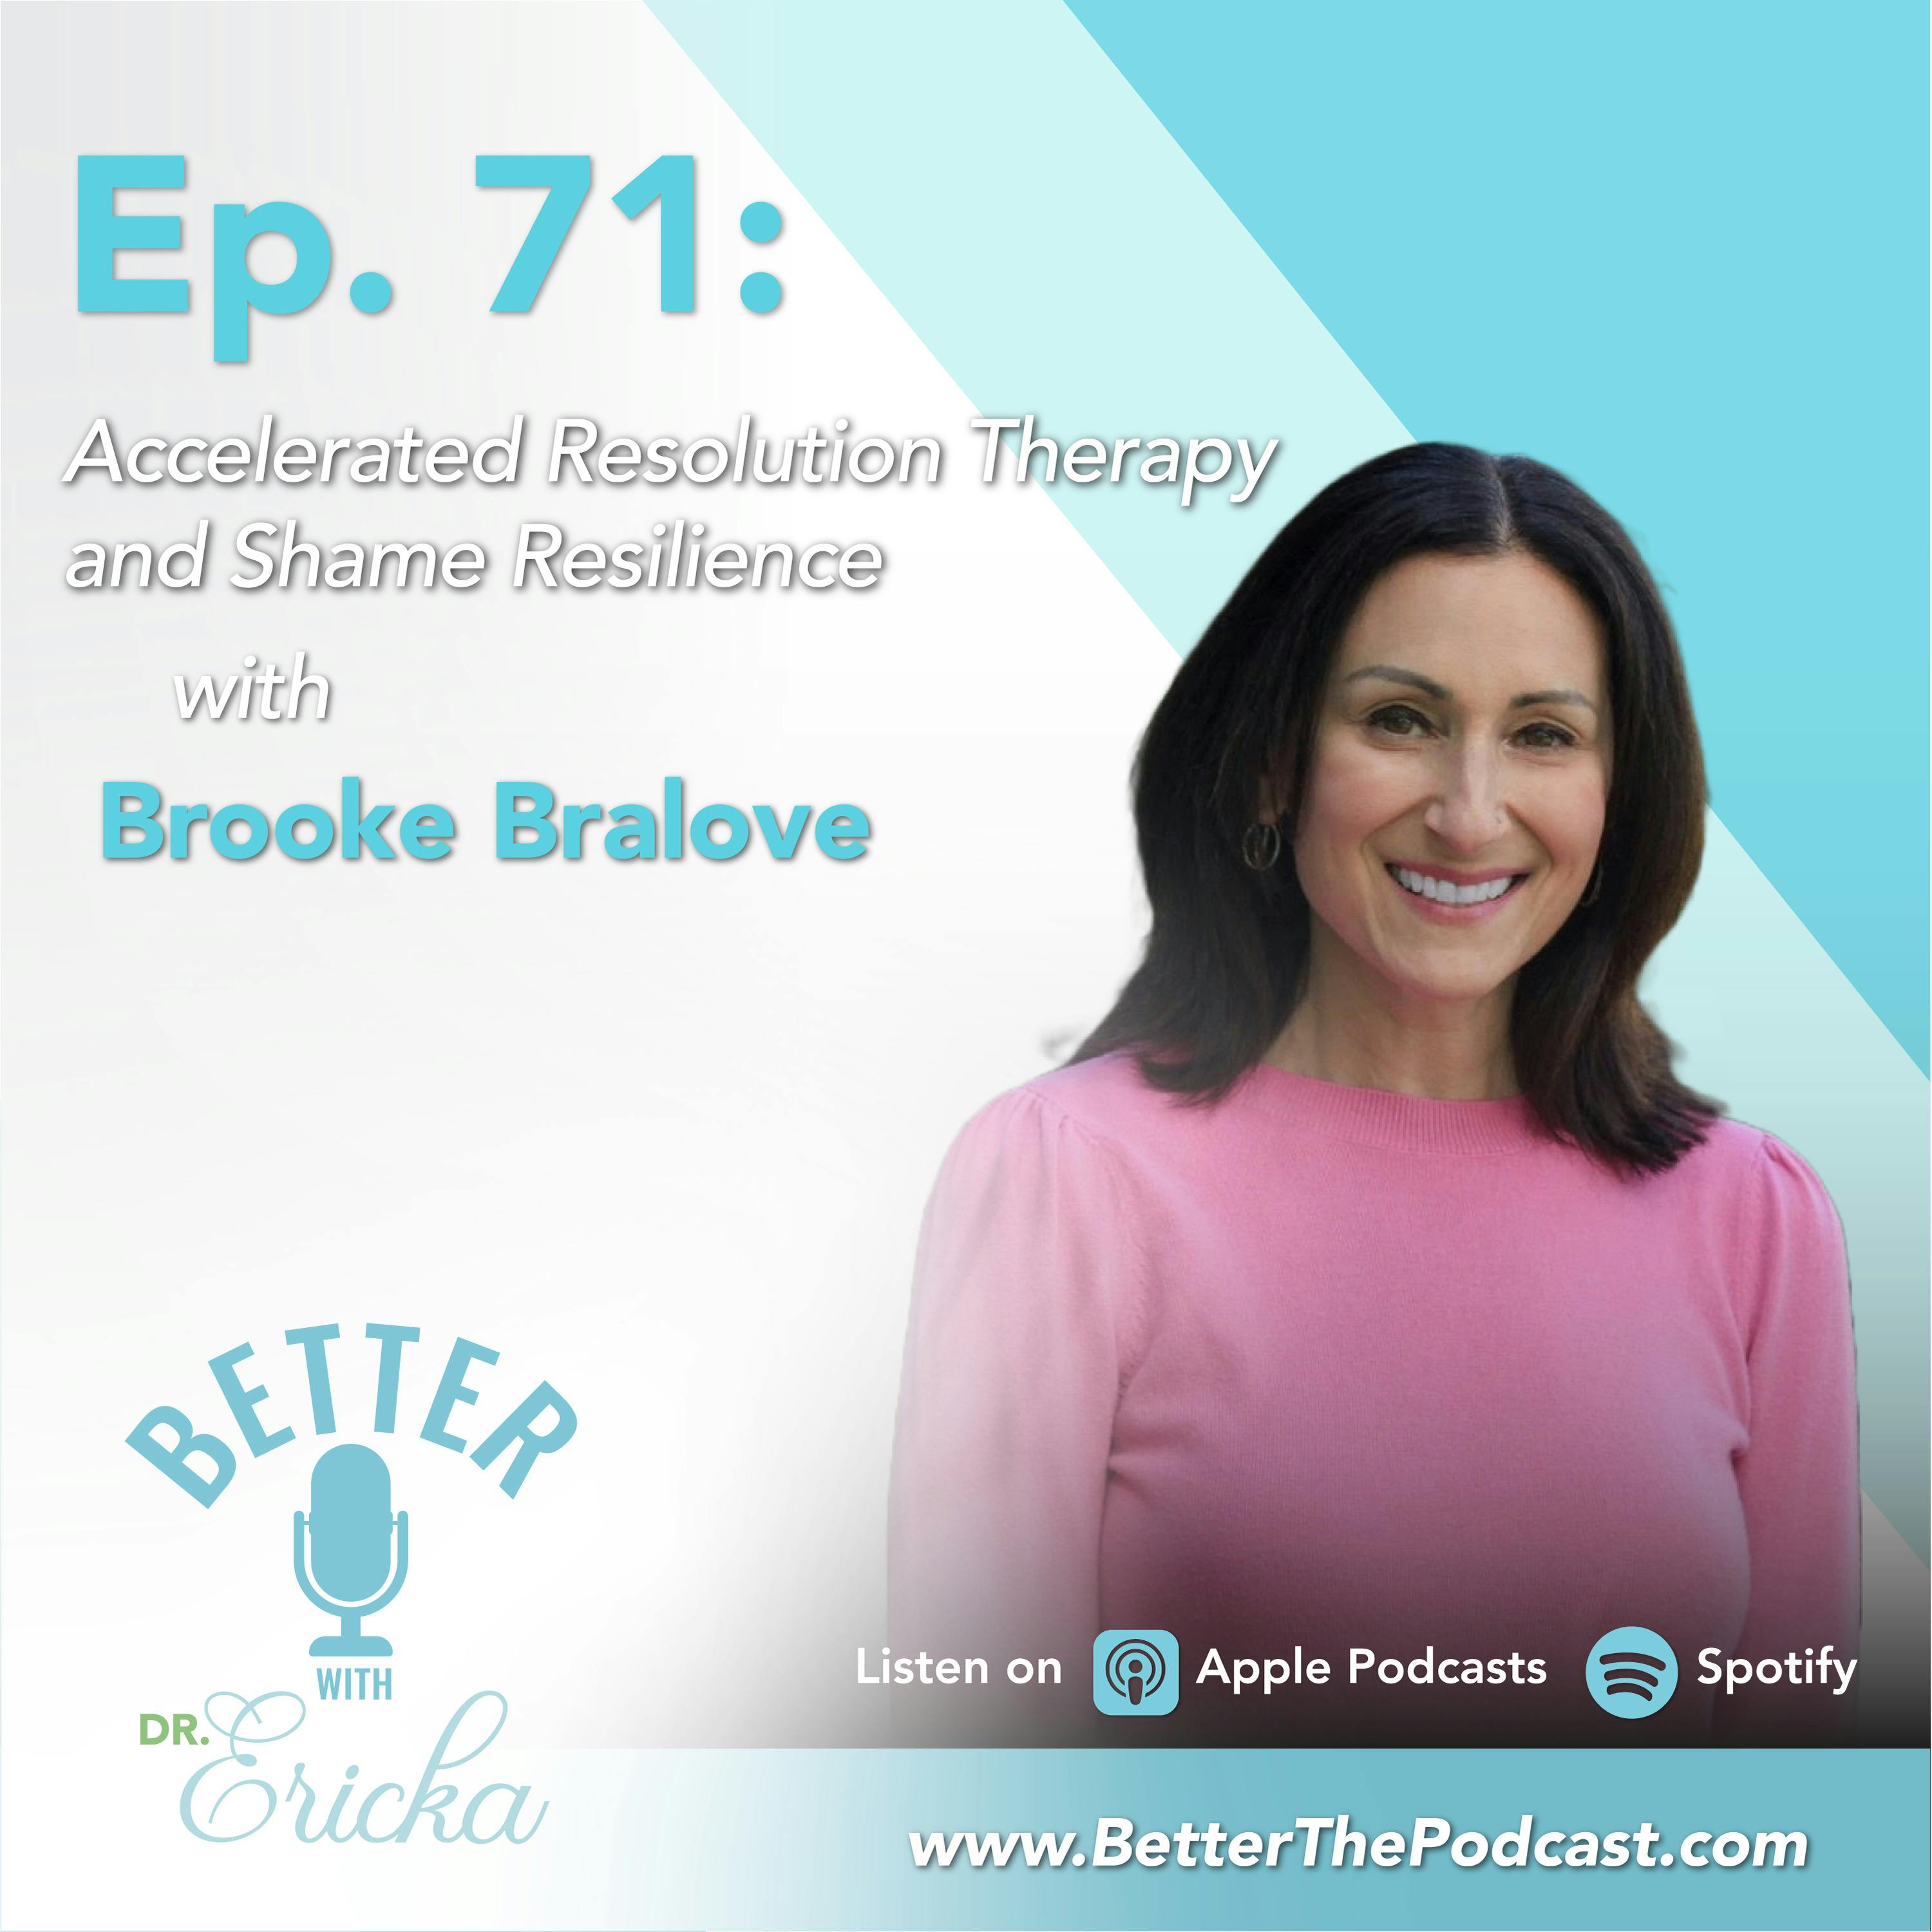 Accelerated Resolution Therapy and Shame Resilience with Brooke Bralove